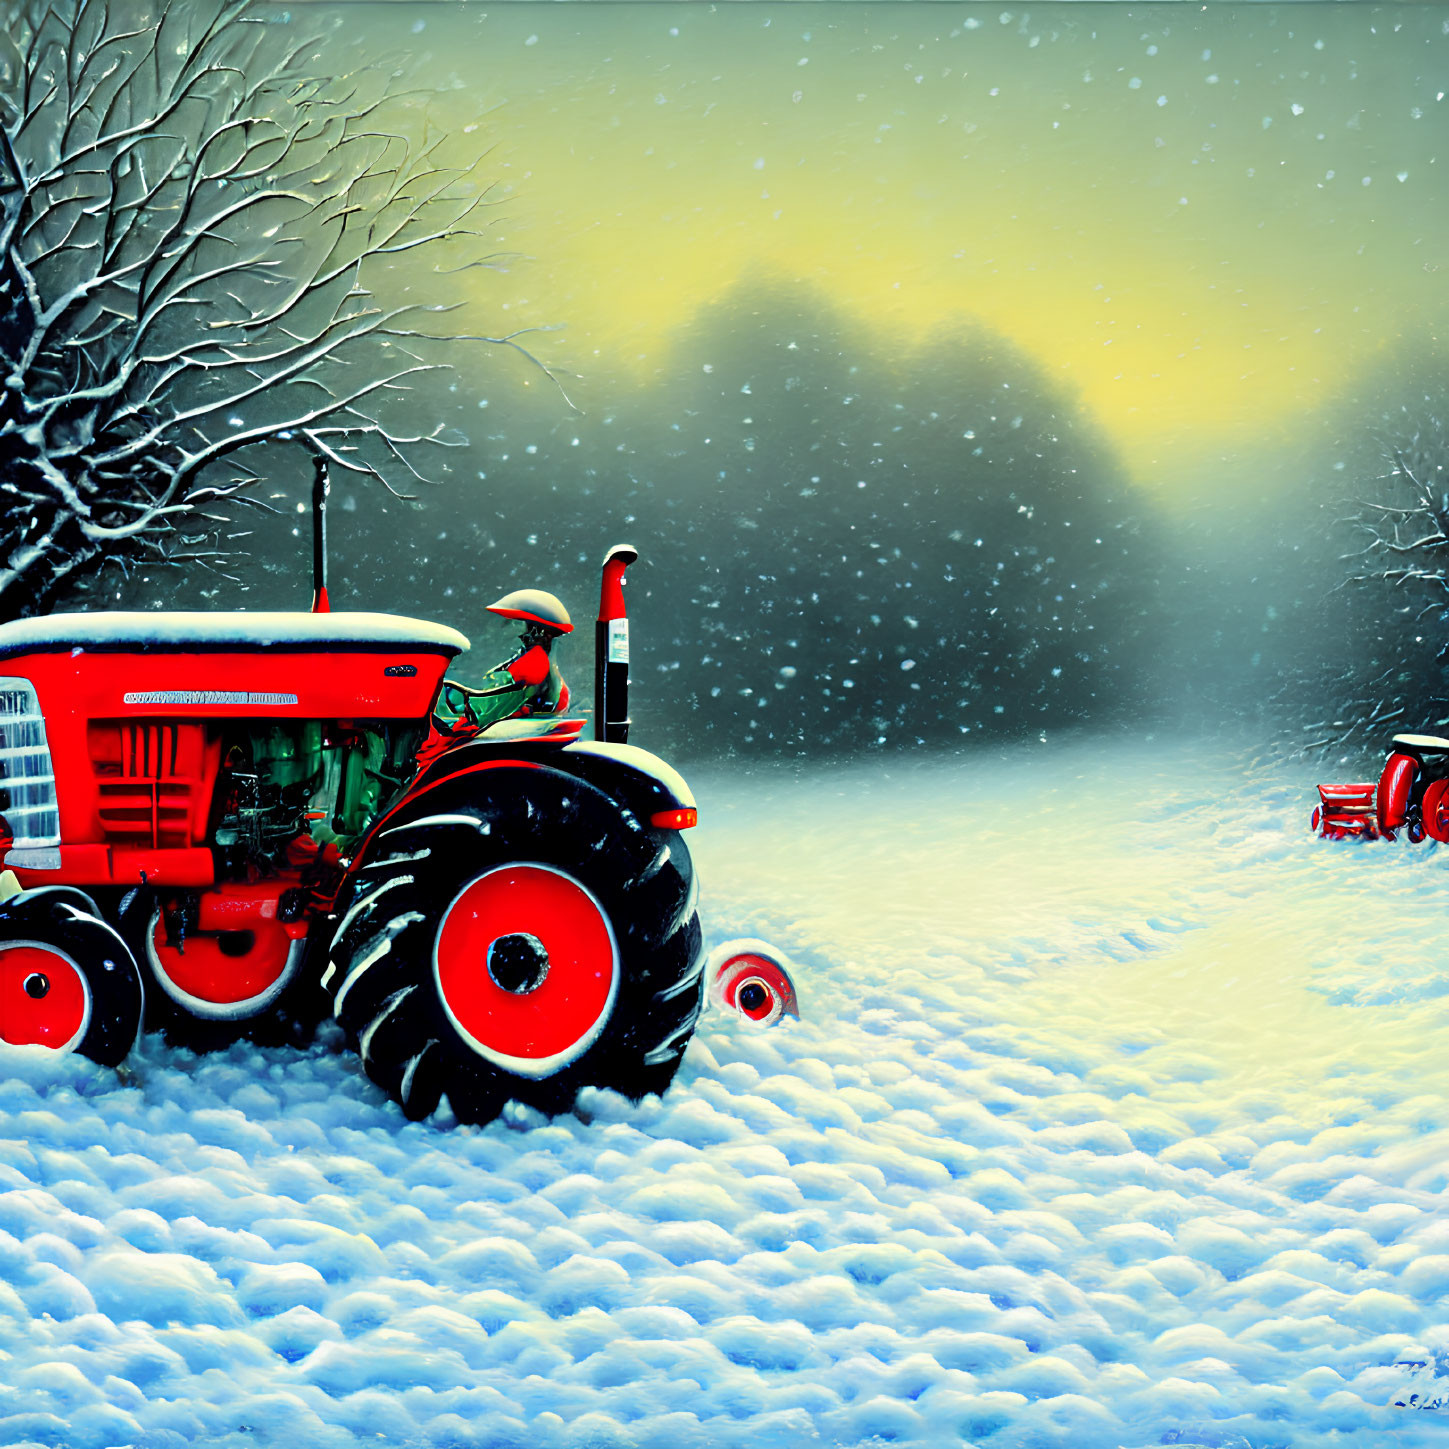 Red-coated person drives red tractor in snow-covered landscape with bare trees and golden sky.